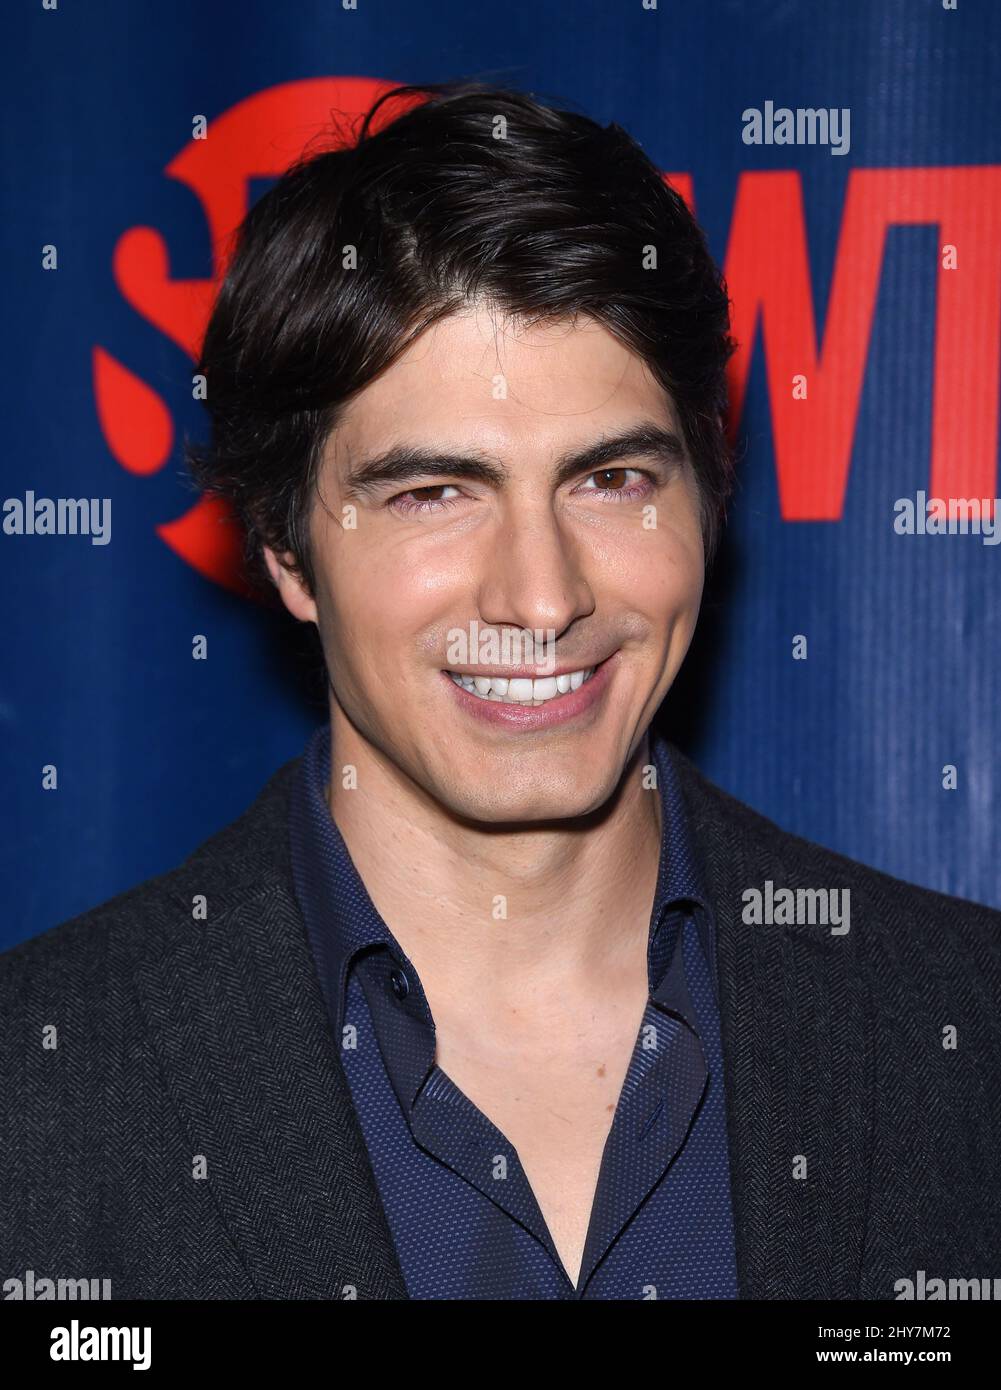 Brandon Routh attending the CBS, The CW and Showtime Summer TCA press tour. Stock Photo